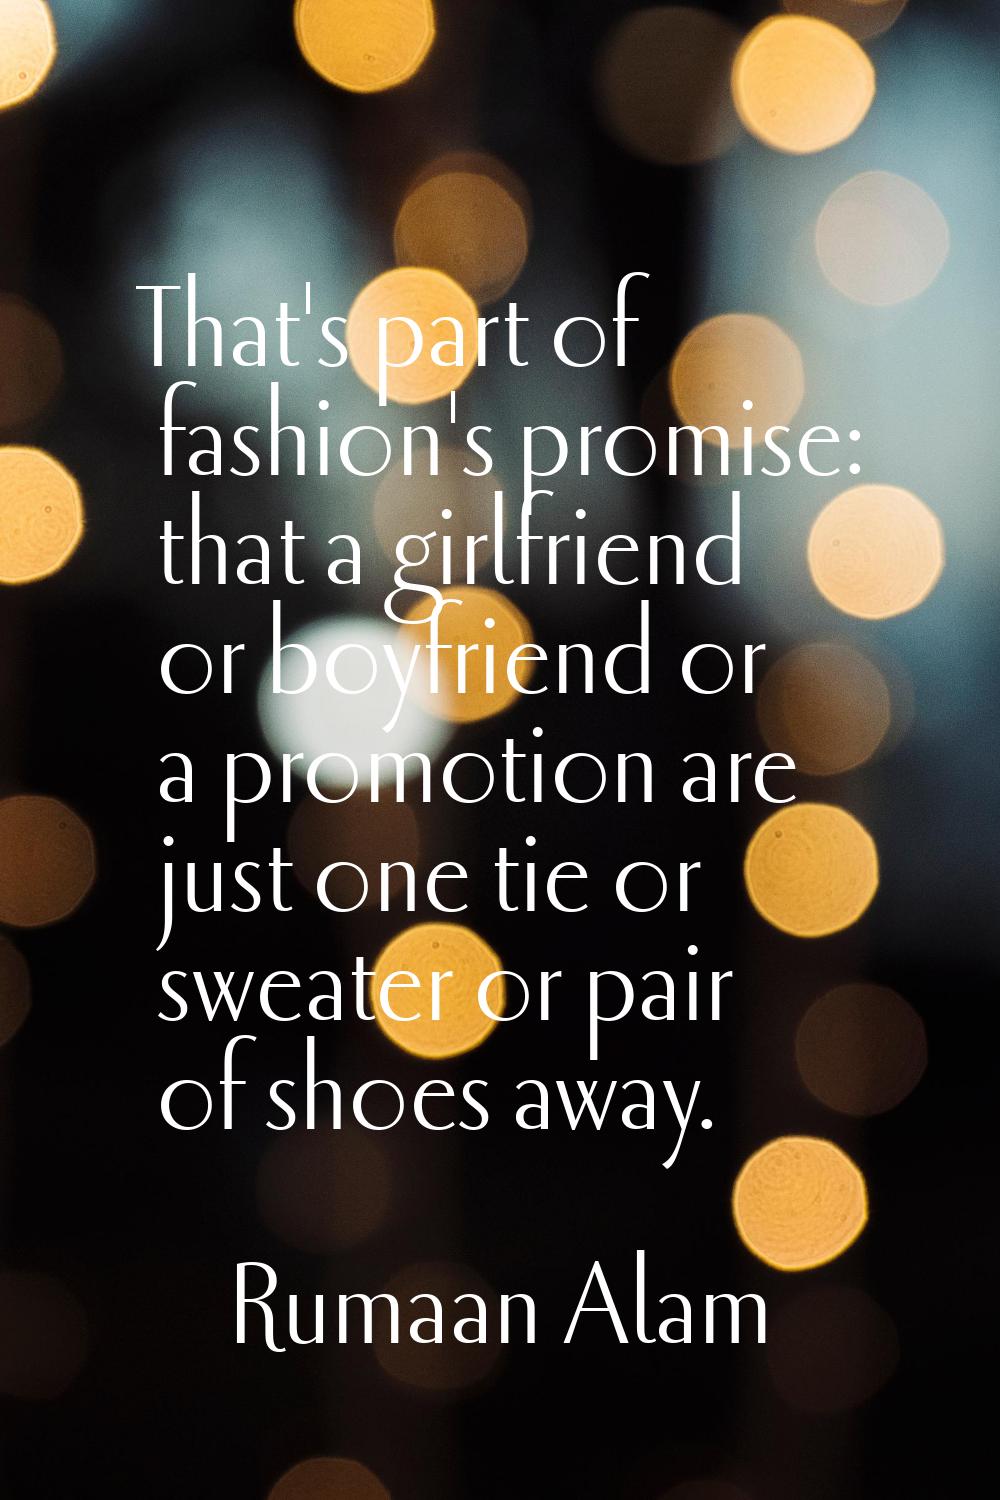 That's part of fashion's promise: that a girlfriend or boyfriend or a promotion are just one tie or